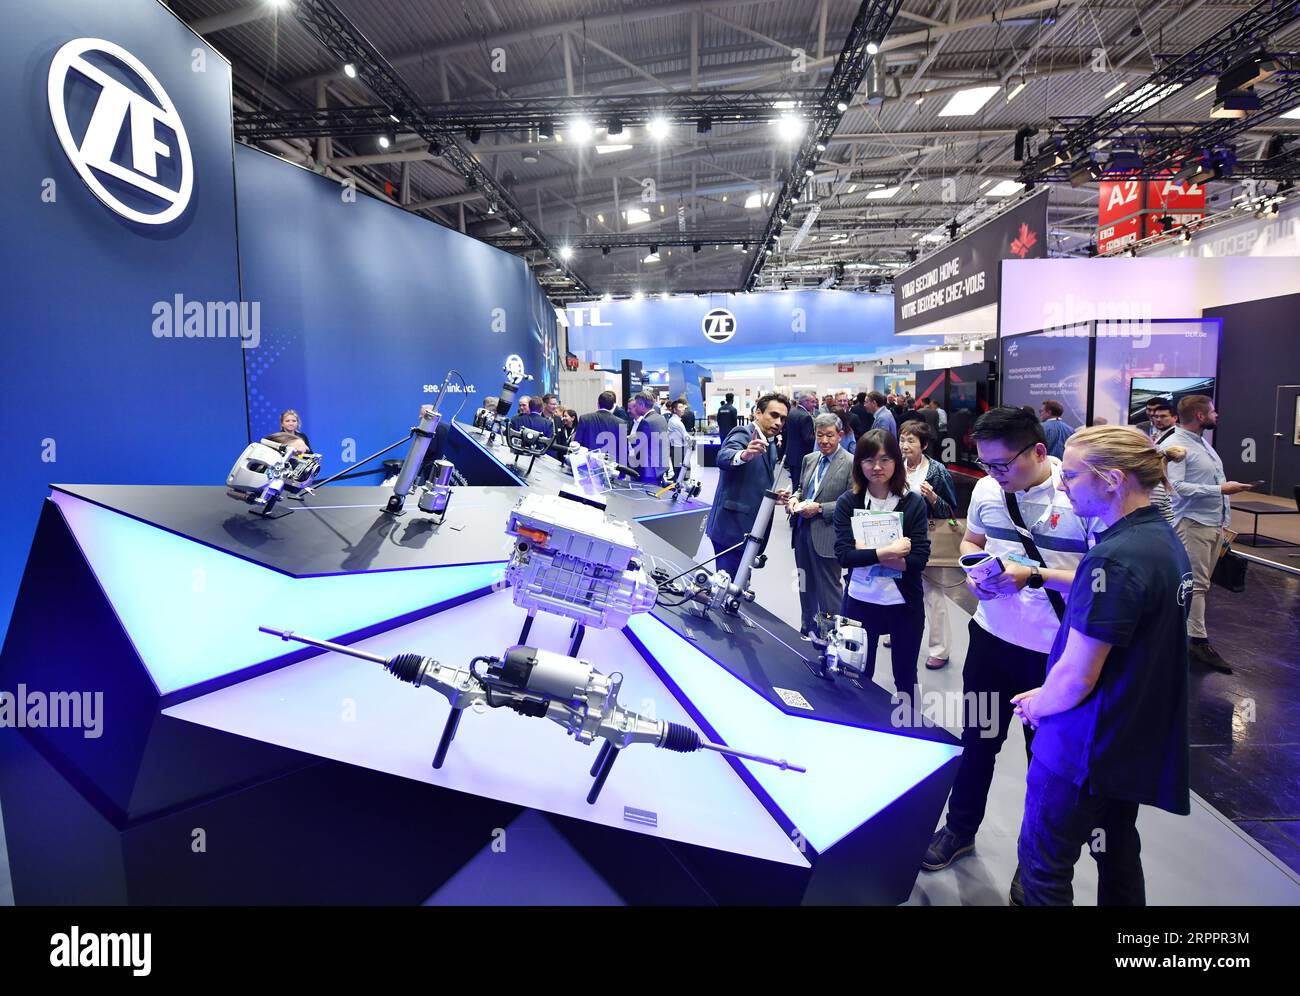 (230905) -- MUNICH, Sept. 5, 2023 (Xinhua) -- People visit the booth of ZF during the 2023 International Motor Show, officially known as the IAA MOBILITY 2023, in Munich, Germany, Sept. 5, 2023. The IAA MOBILITY 2023, one of the world's largest mobility trade fairs, opened in the southern German city of Munich on Tuesday. At the six-day event are some 70 Chinese firms, the second largest number after the German participants. Under the motto of 'Experience Connected Mobility' of this year's IAA, Chinese carmakers are rolling out more chances and choices for local partners and customers in E Stock Photo